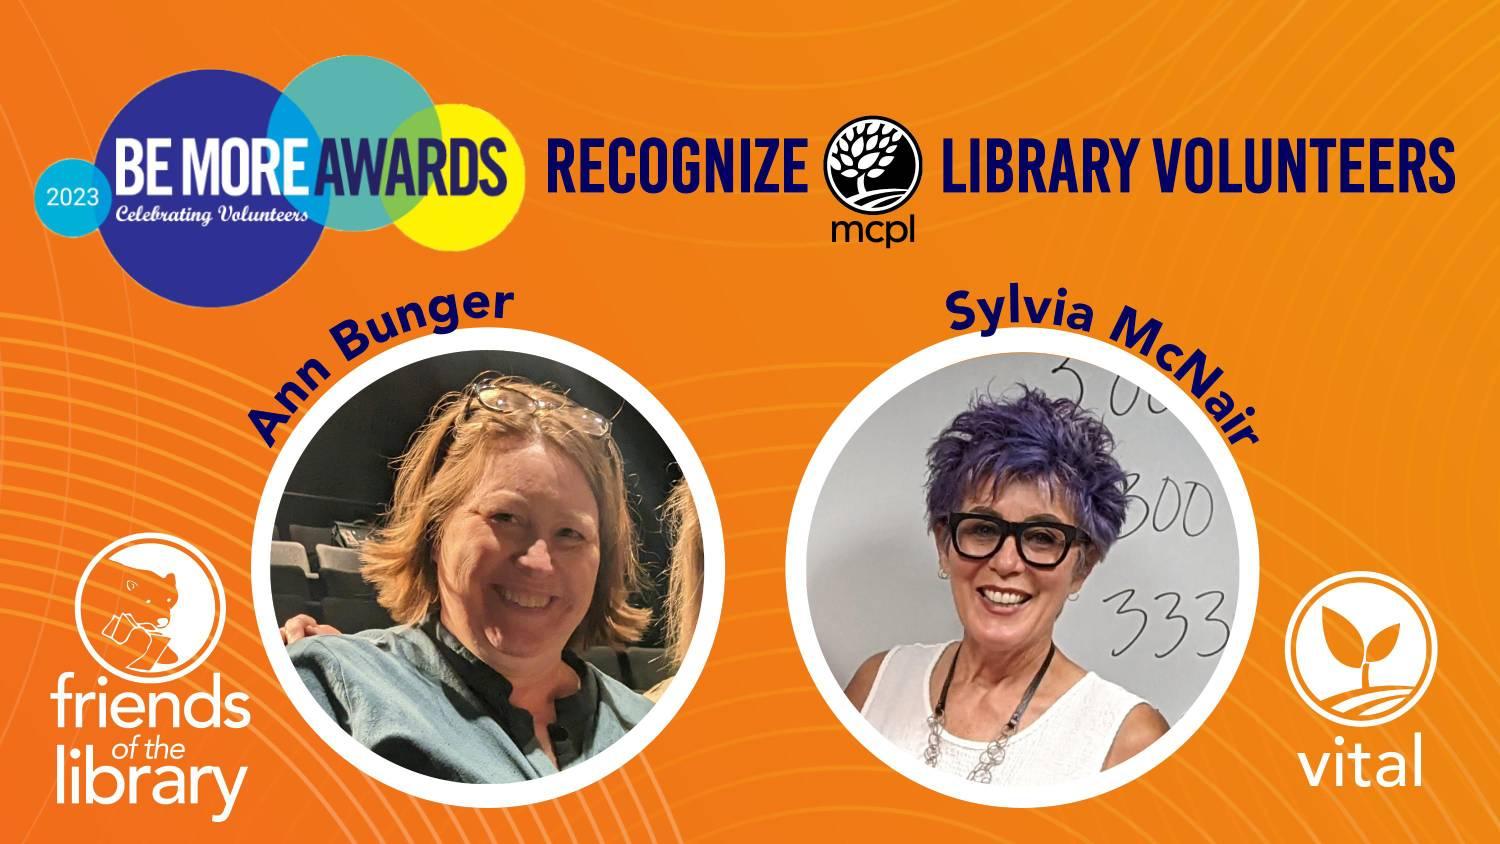 2023 Be More Awards Recognize Library Volunteers Ann Bunger and Sylvia McNair. Photos of the two women are shown in circles on an orange background.  